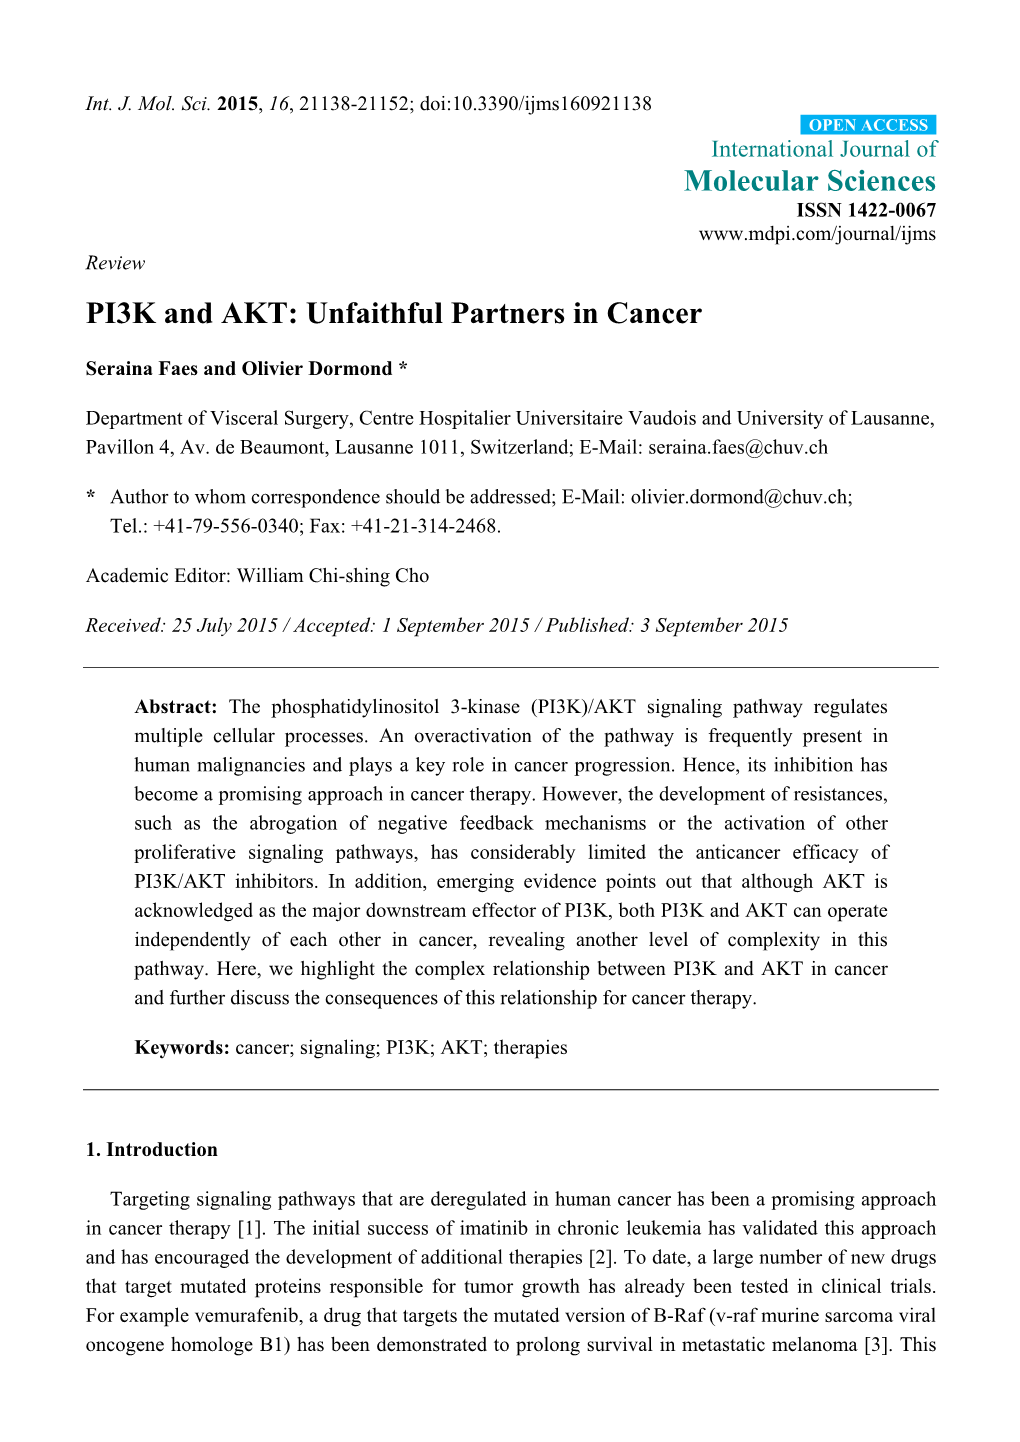 PI3K and AKT: Unfaithful Partners in Cancer